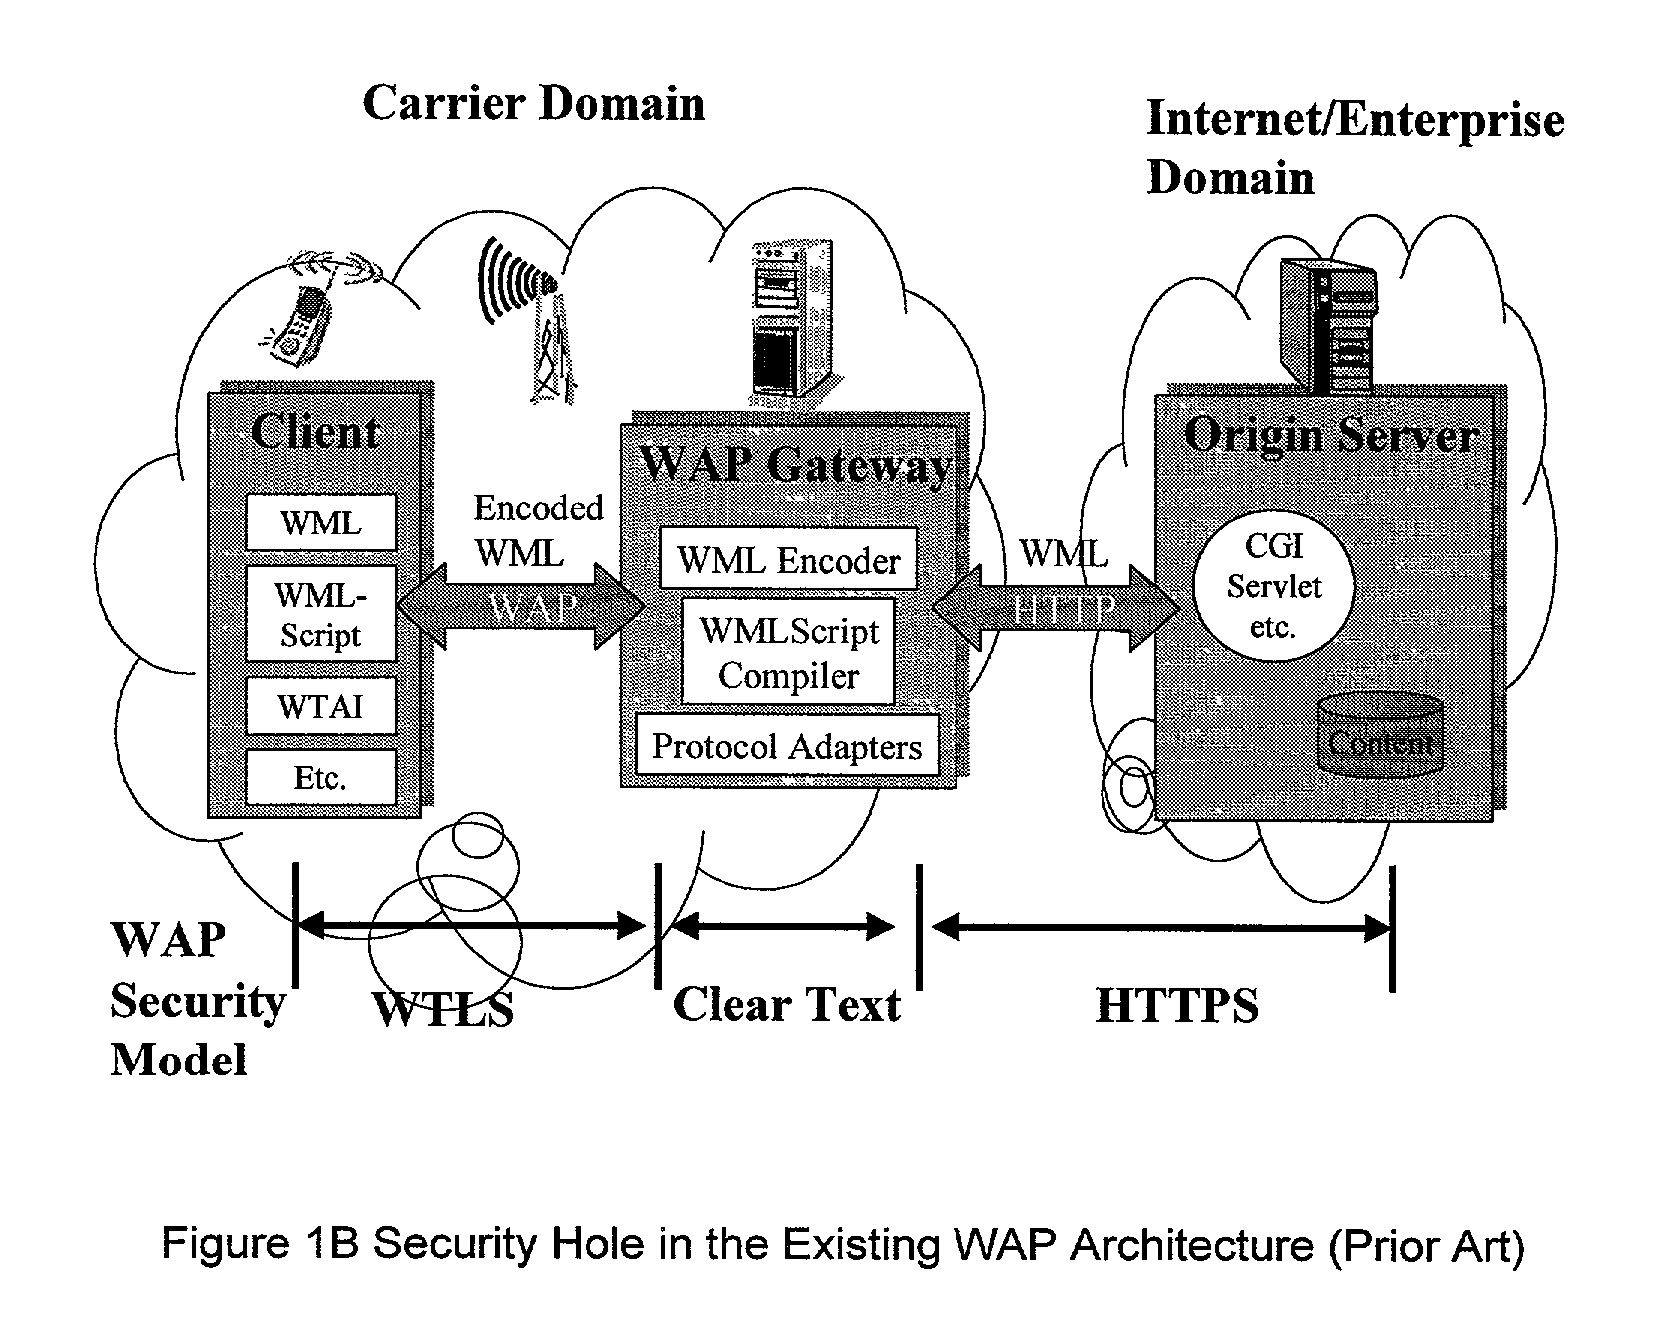 Method and apparatus for providing service selection, redirection and managing of subscriber access to multiple WAP (Wireless Application Protocol) gateways simultaneously